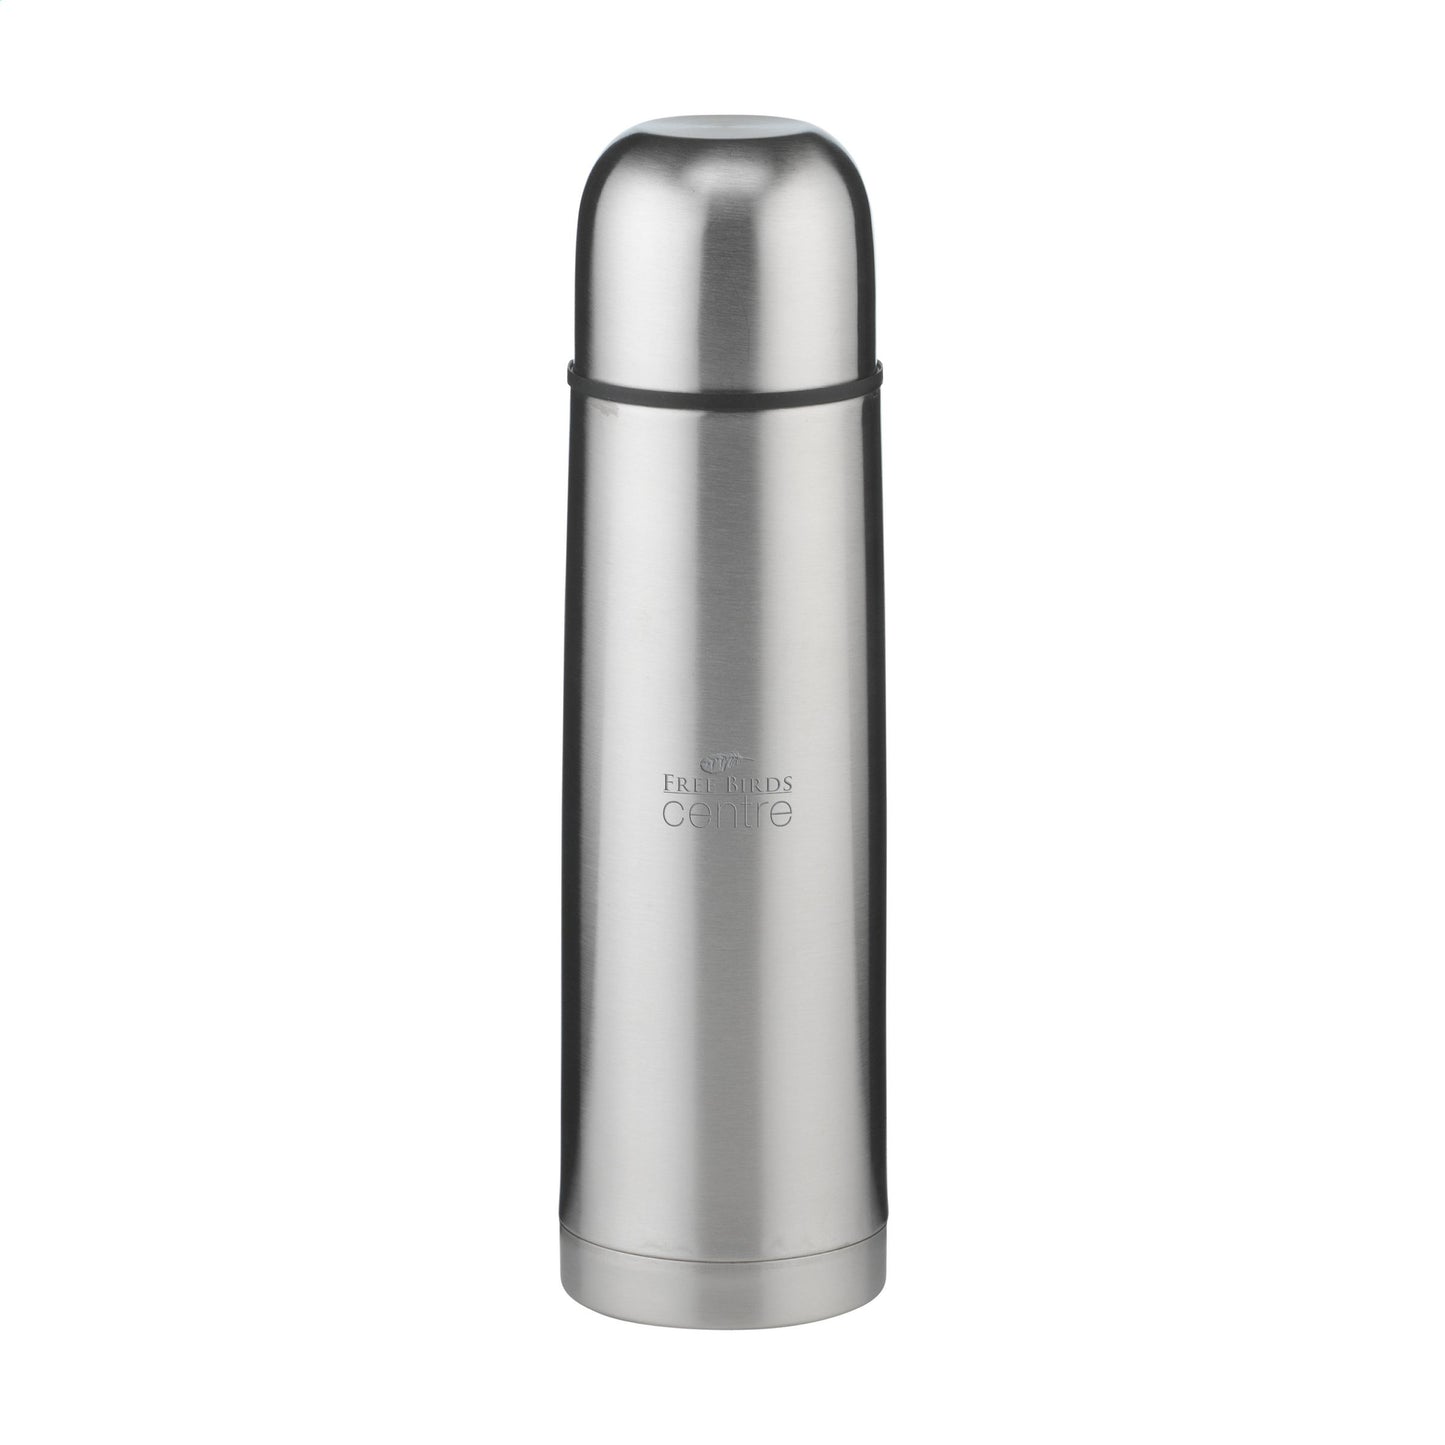 Thermotop 500 ml Thermoflasche